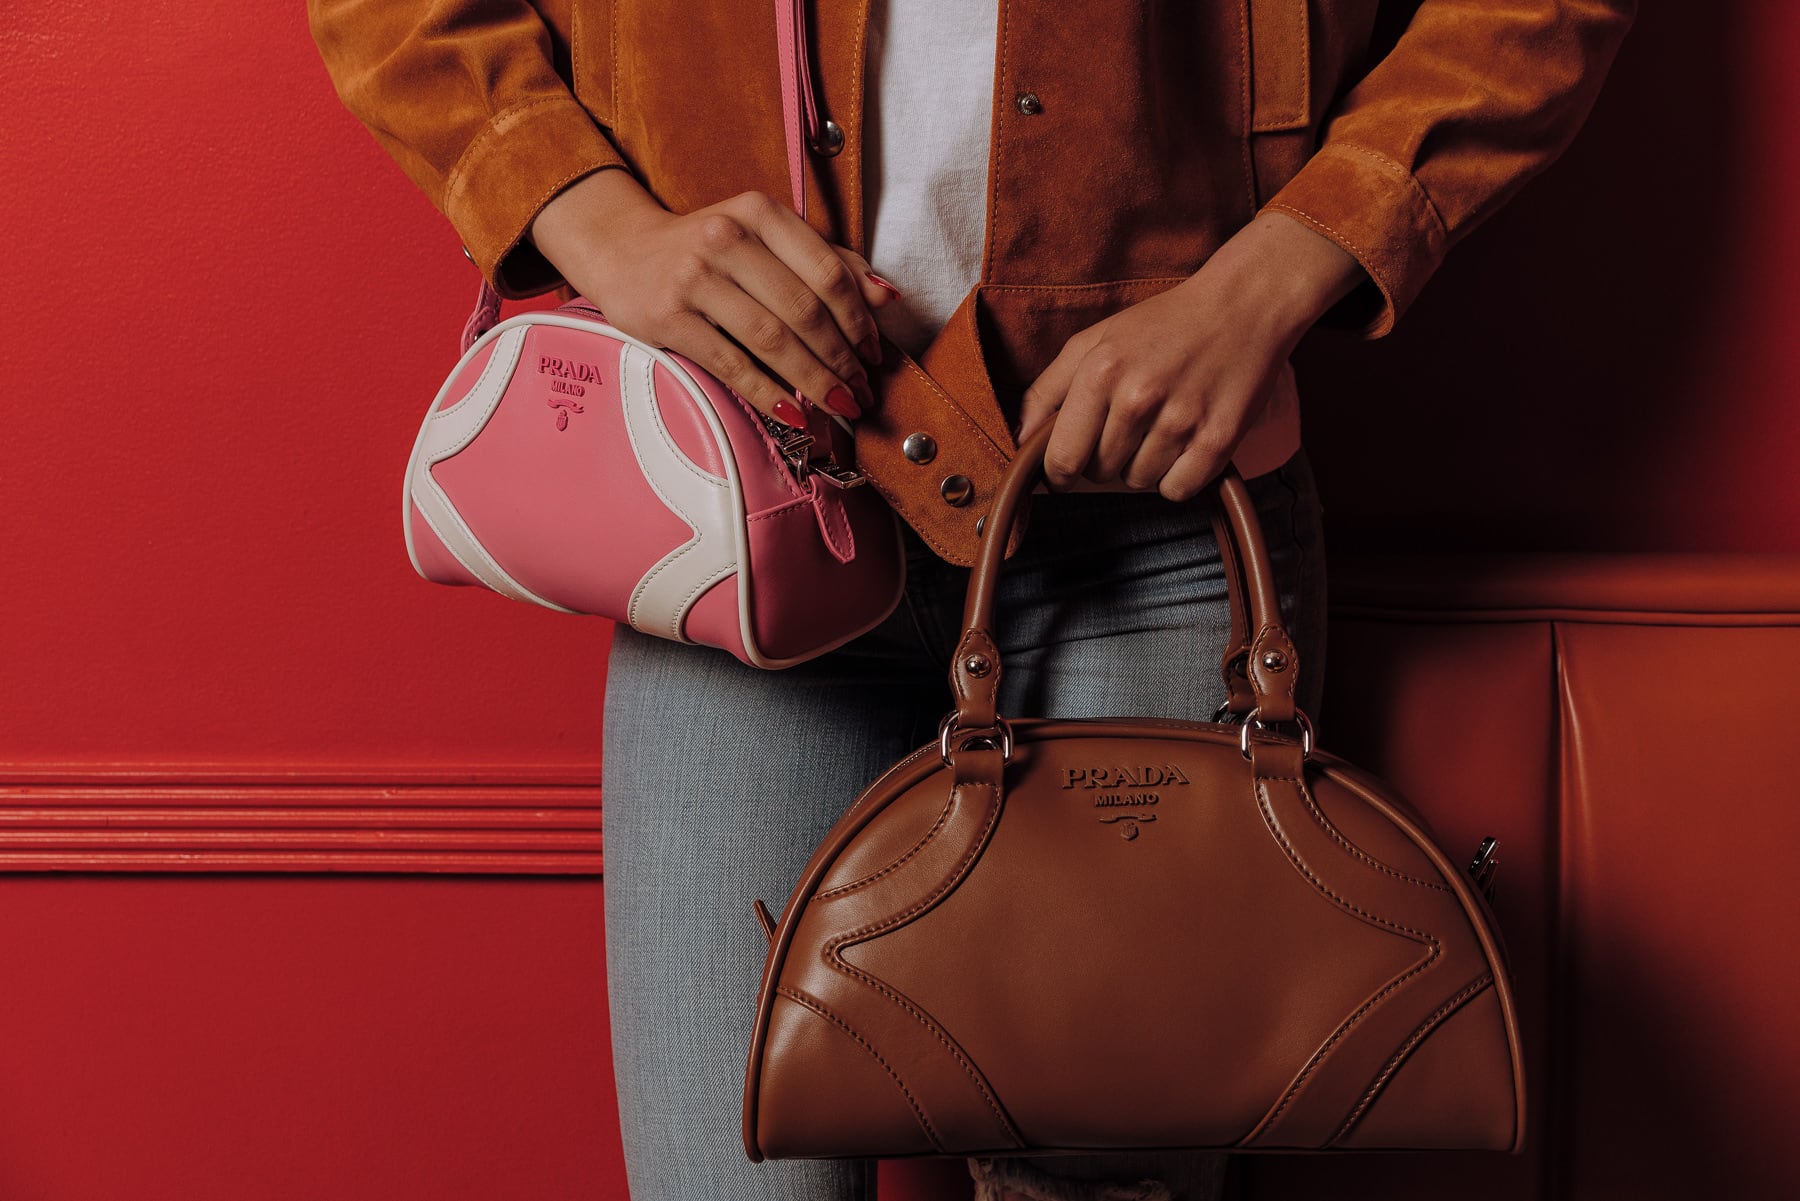 Bowler Bags Are Taking Over Summer 2023 Purse Trends